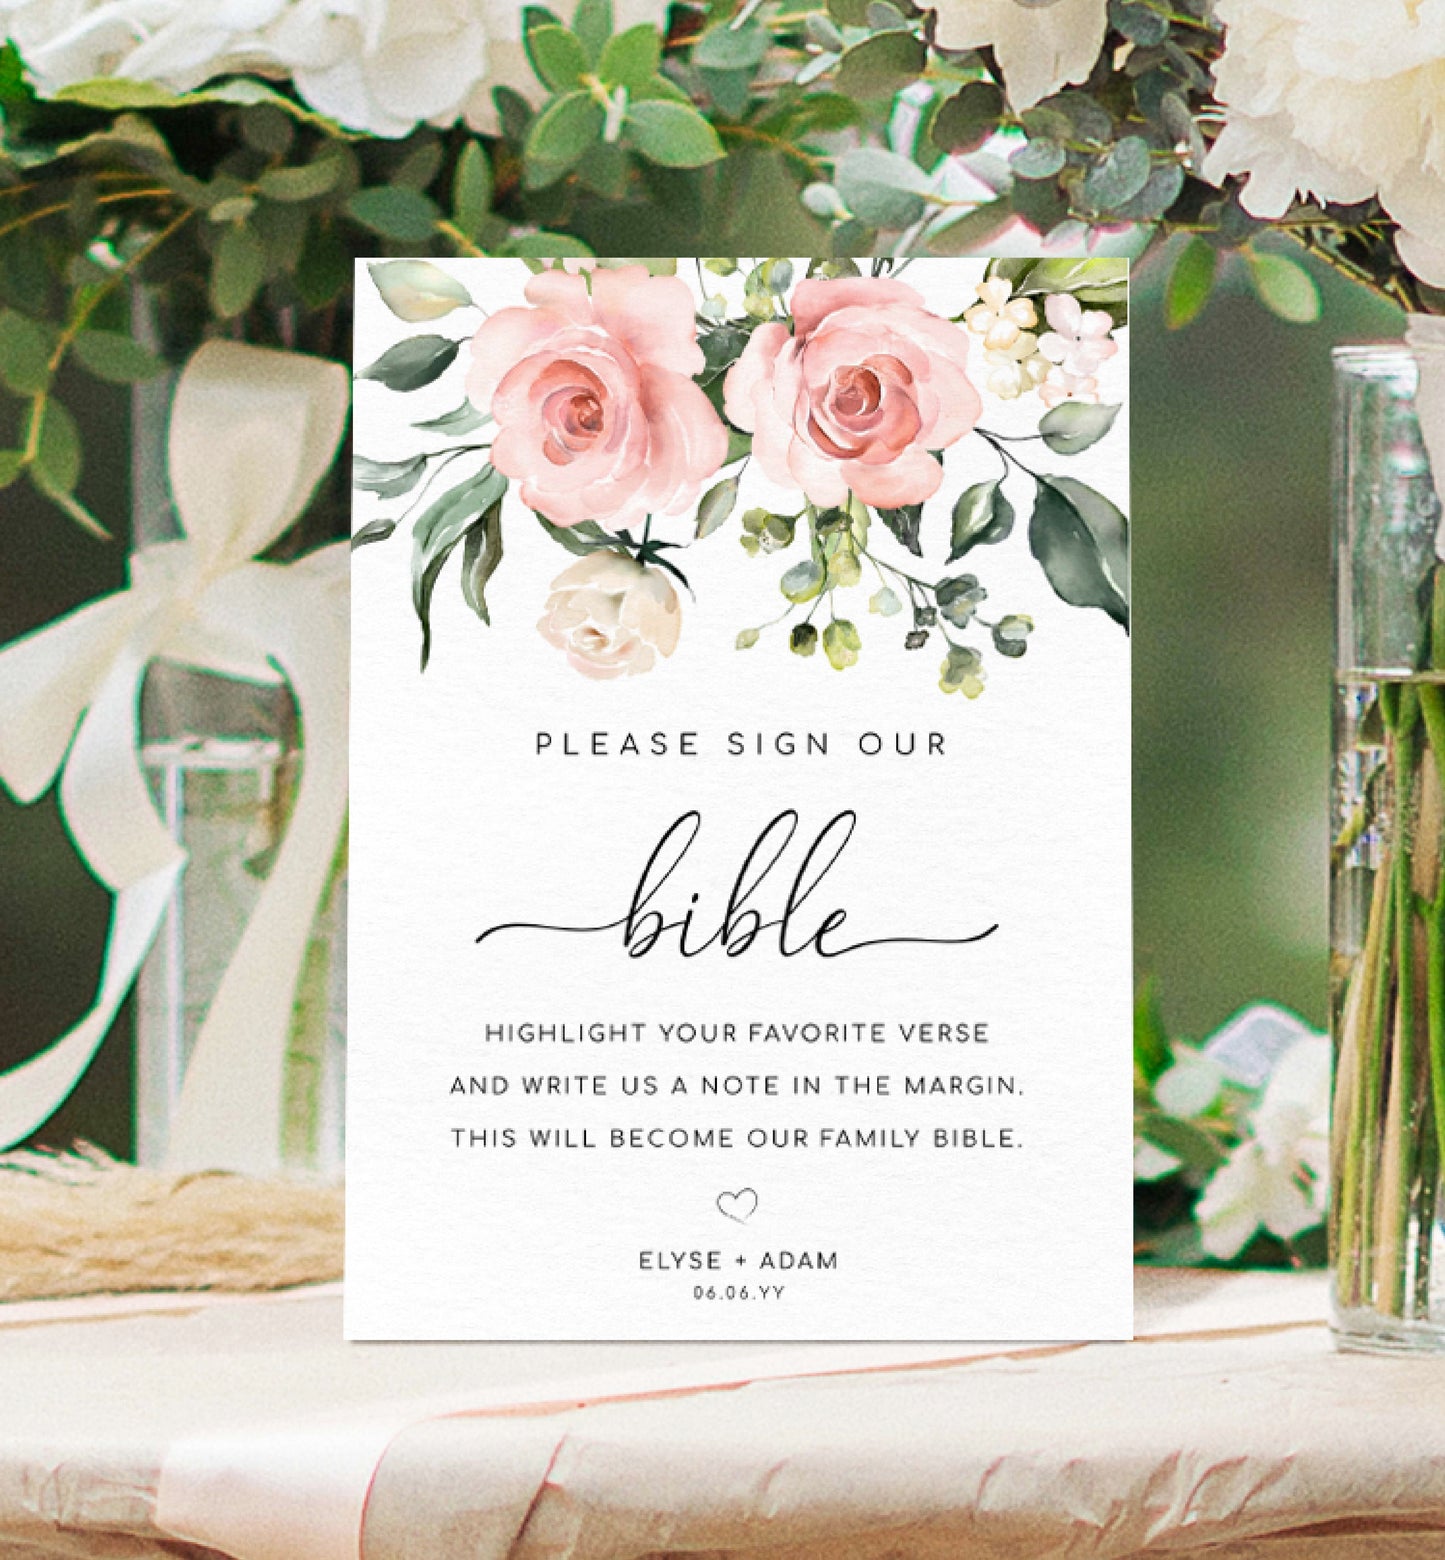 Printable Sign Our Bible Sign, Blue Floral Wedding Bible Guest Book Sign, Pink Roses Please Sign Our Guest Book Sign, Wedding Signage, Darcy